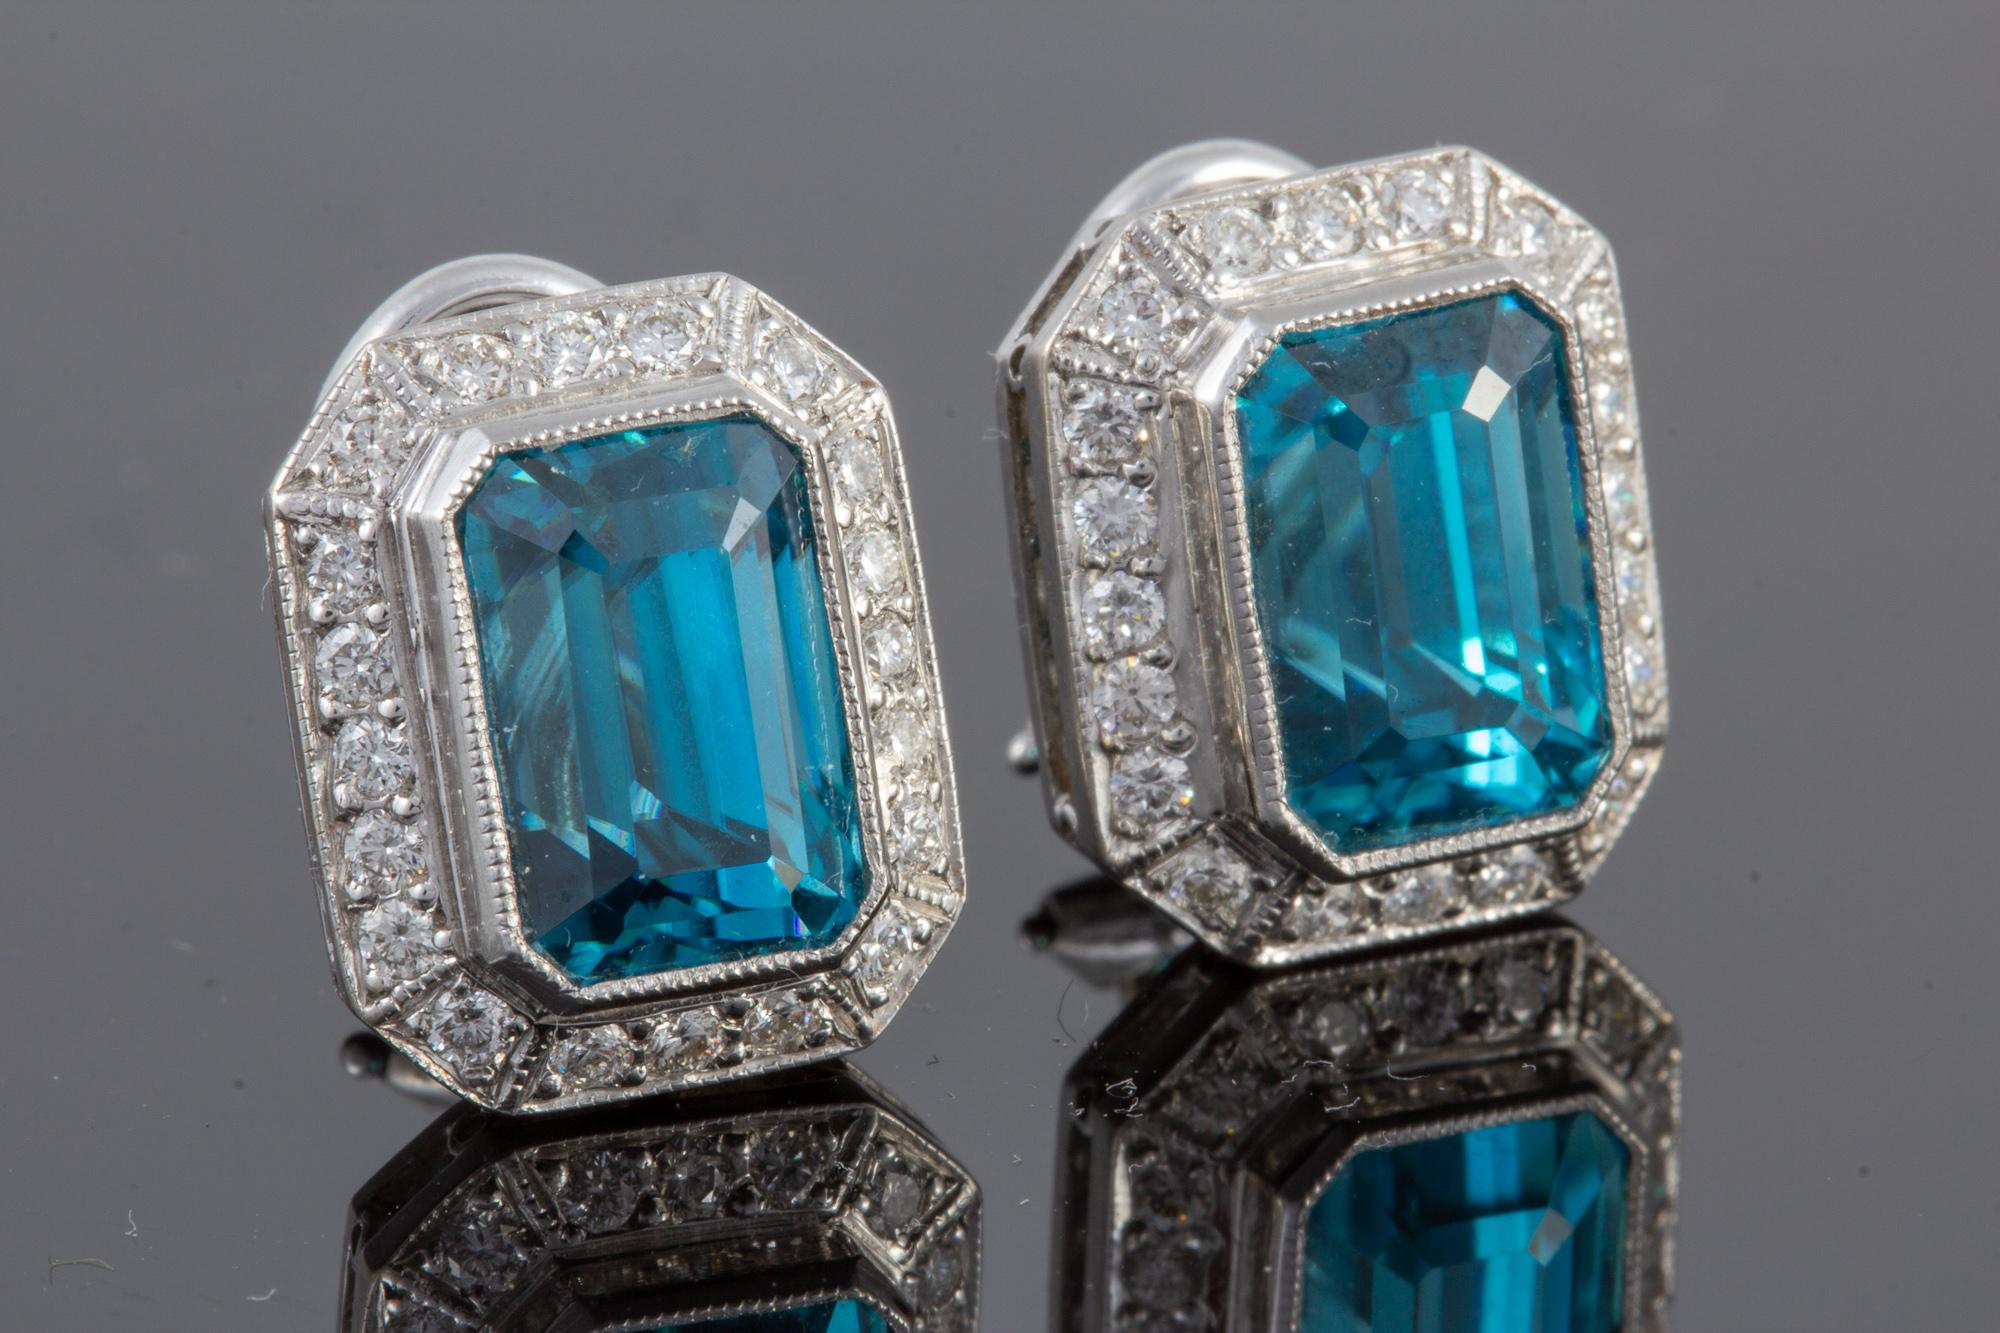 These exquisite earrings feature exceptionally clean emerald cut blue zircons weighing 10.34 carats.  Surrounded by .52 carats of round brilliant  F/G VSI diamonds, the hand crafted bezels are platinum.   Measuring approx. 14mm x 12mm, these